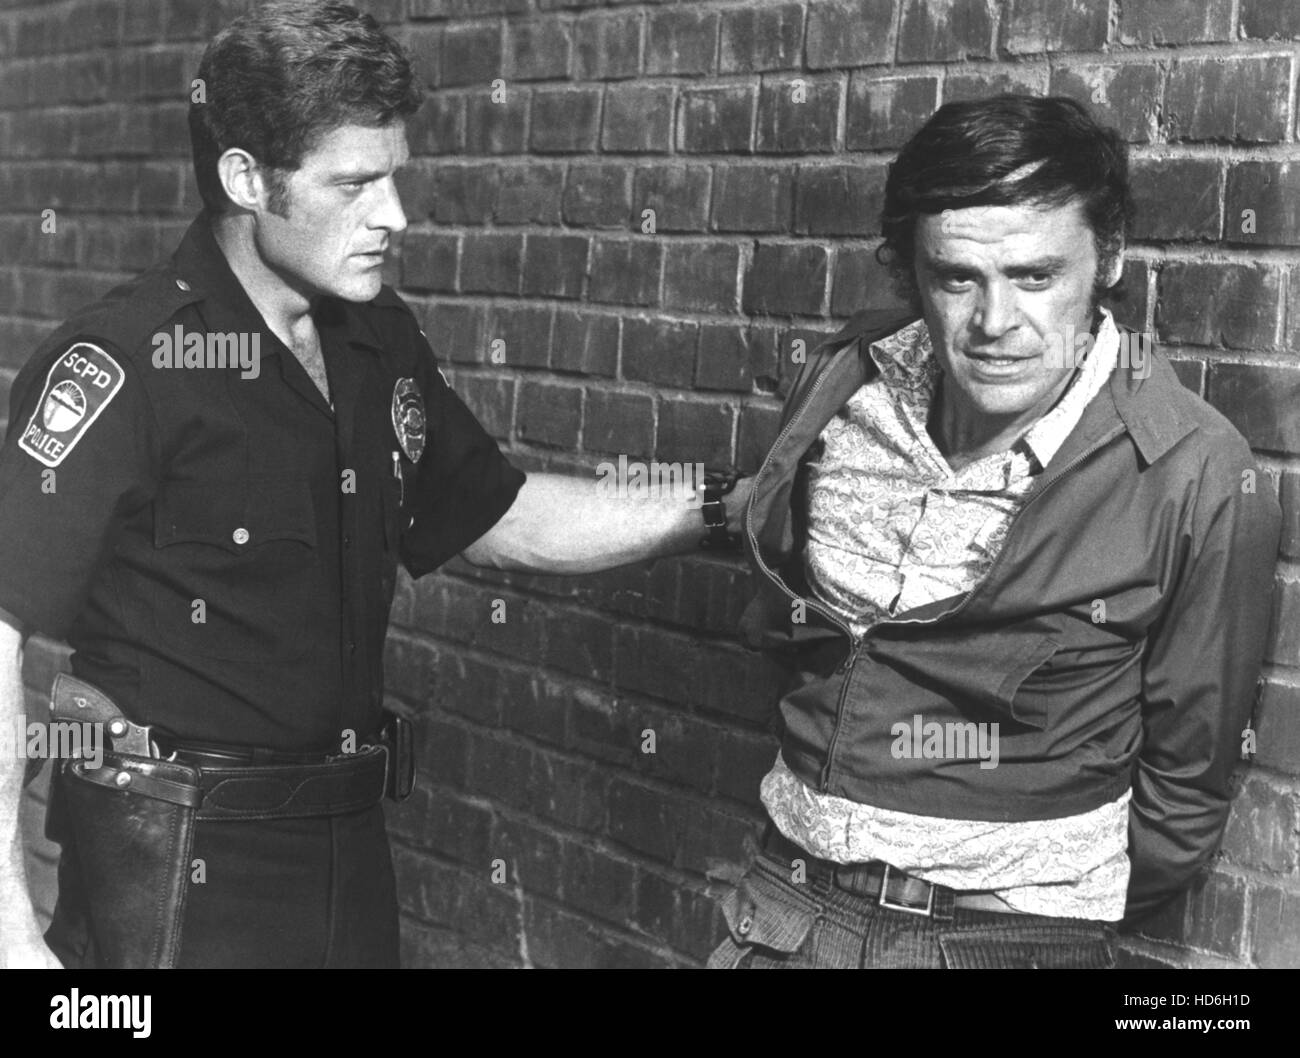 THE ROOKIES, Sam Melville, Lee Farr in episode 'To Taste of Terror' aired  11/20/72-Season 1, 1972-76 Stock Photo - Alamy